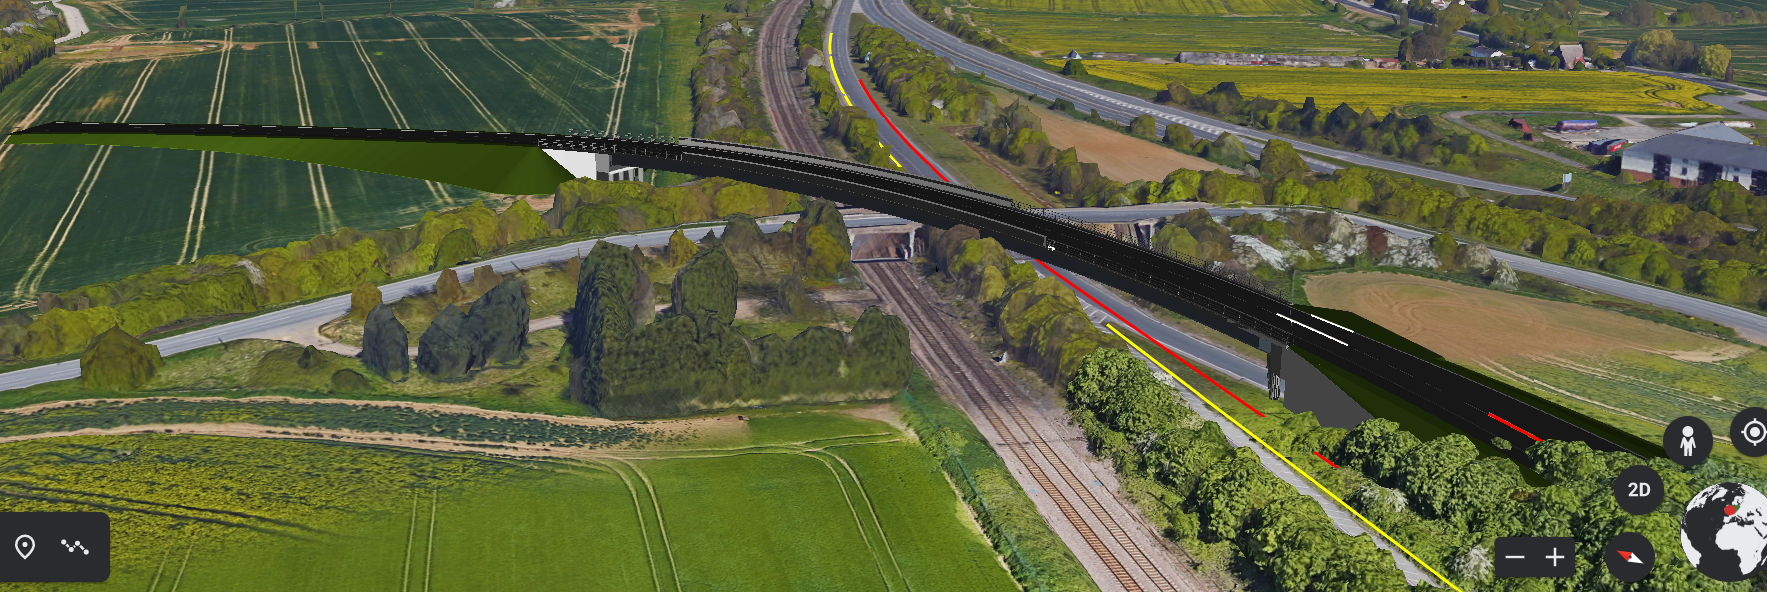 GRAHAM awarded £16m construction phase of Chelmsford Bridge and Highway scheme image